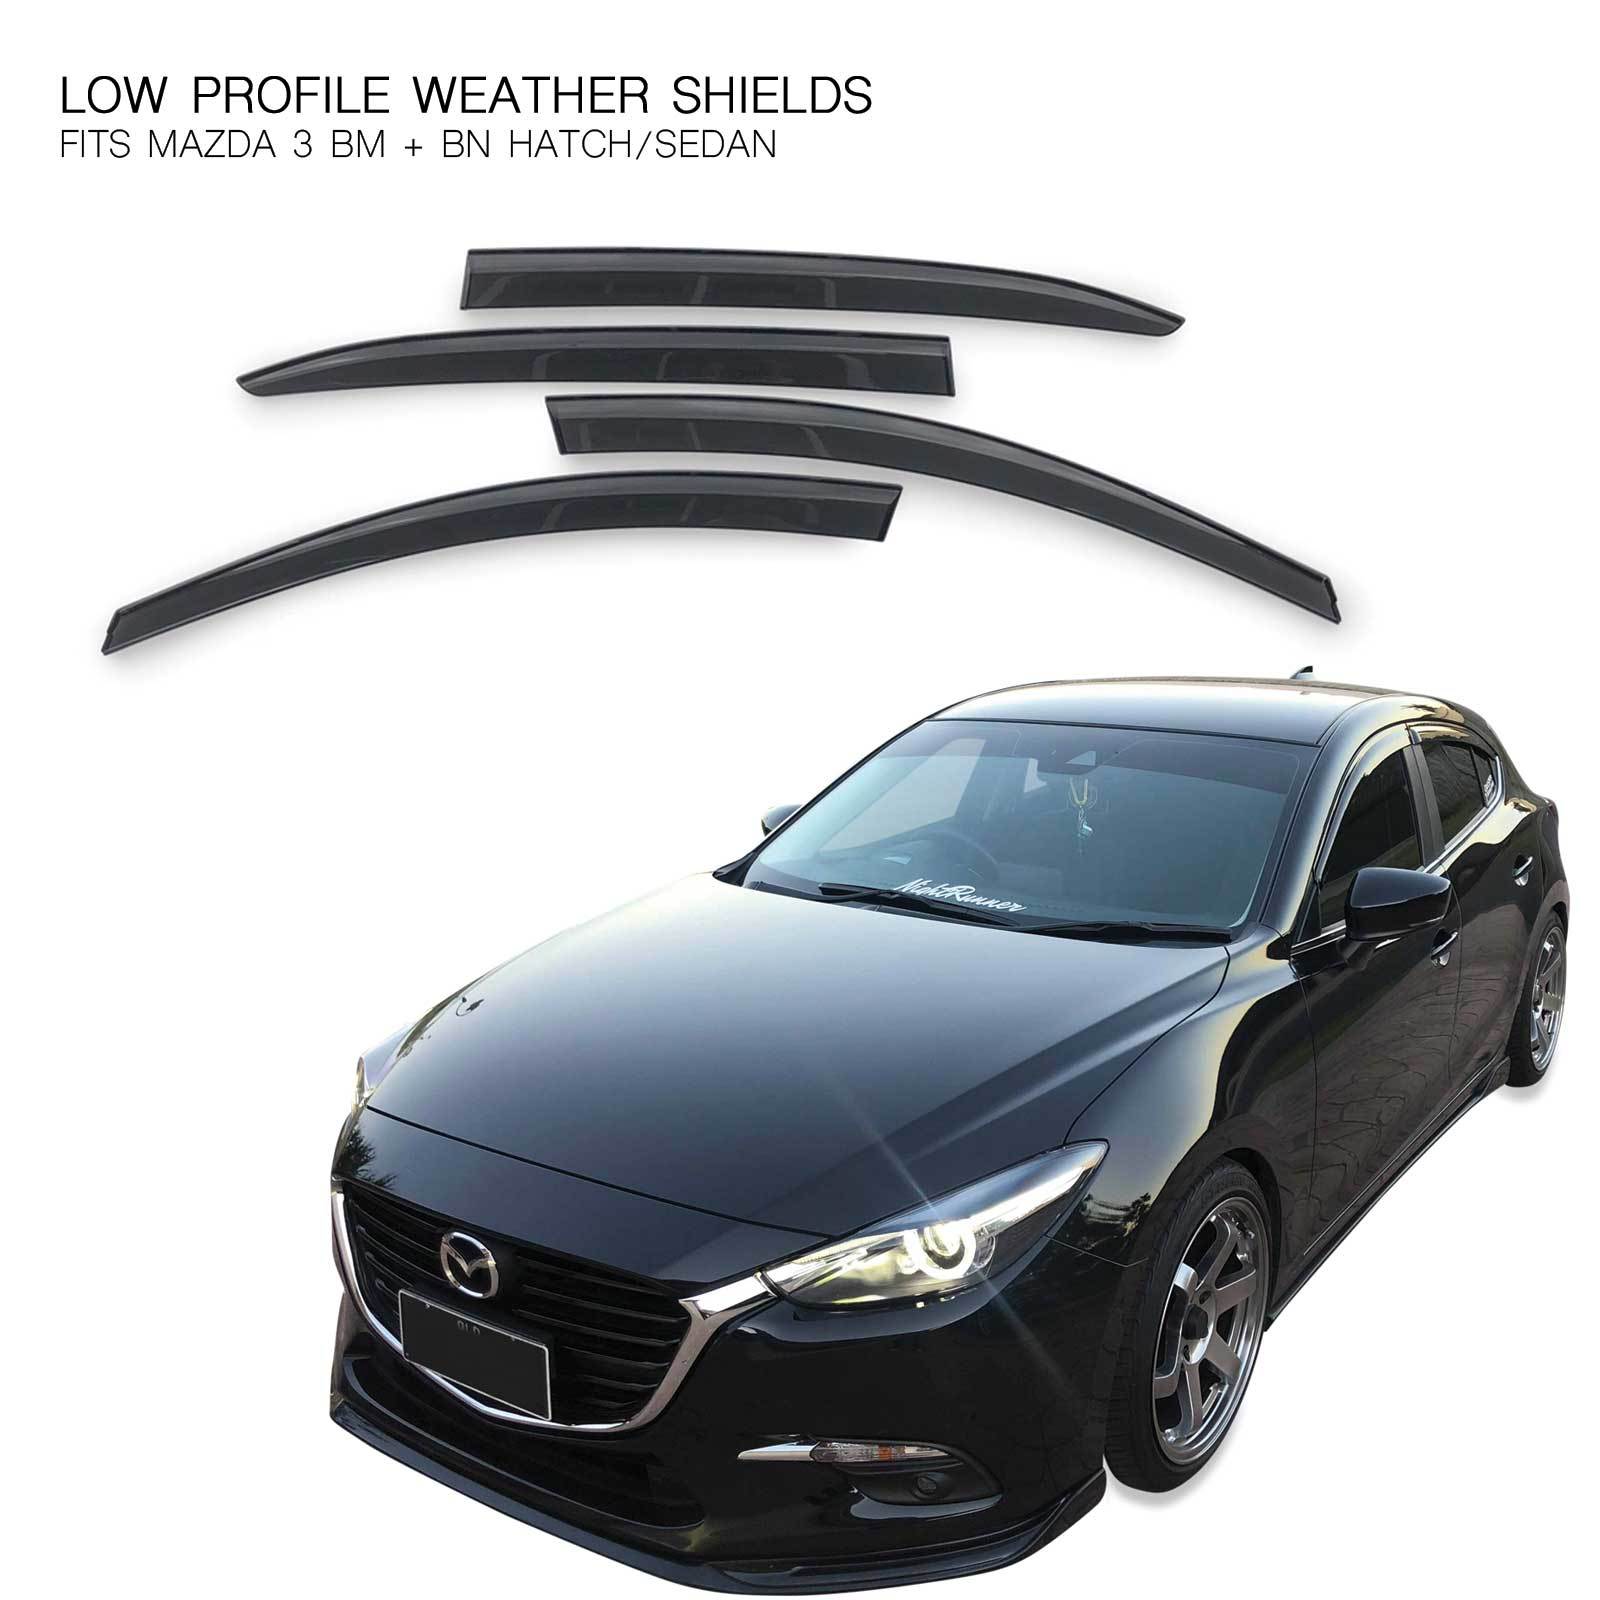 DEAL 4-Piece Set JDM Style Vent Window Visor With Smoke Chrome Trim Window Rain Guard With Outside Mount Tape-On Type Custom Fit High-Class Quality For 2014-2018 Mazda 3 All Models 